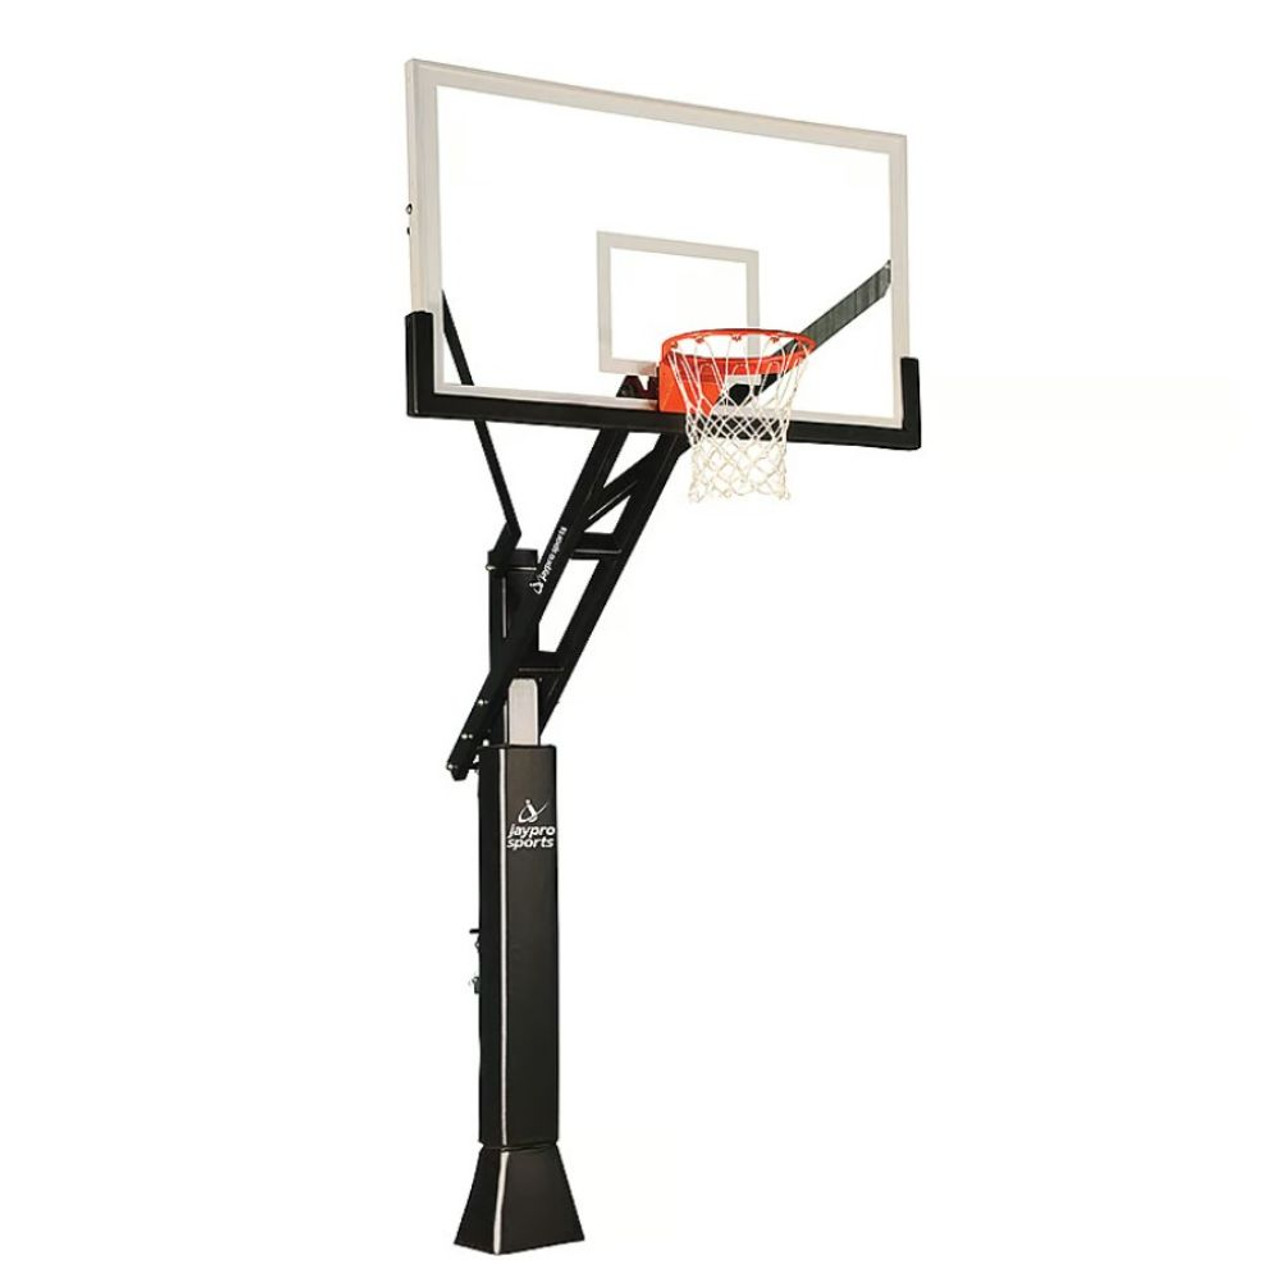 Basketball System - Titan Adjustable Series Black (6 in. x 6 in. Pole with 4 ft. Offset) ‐ 72 in. Tempered Glass Backboard